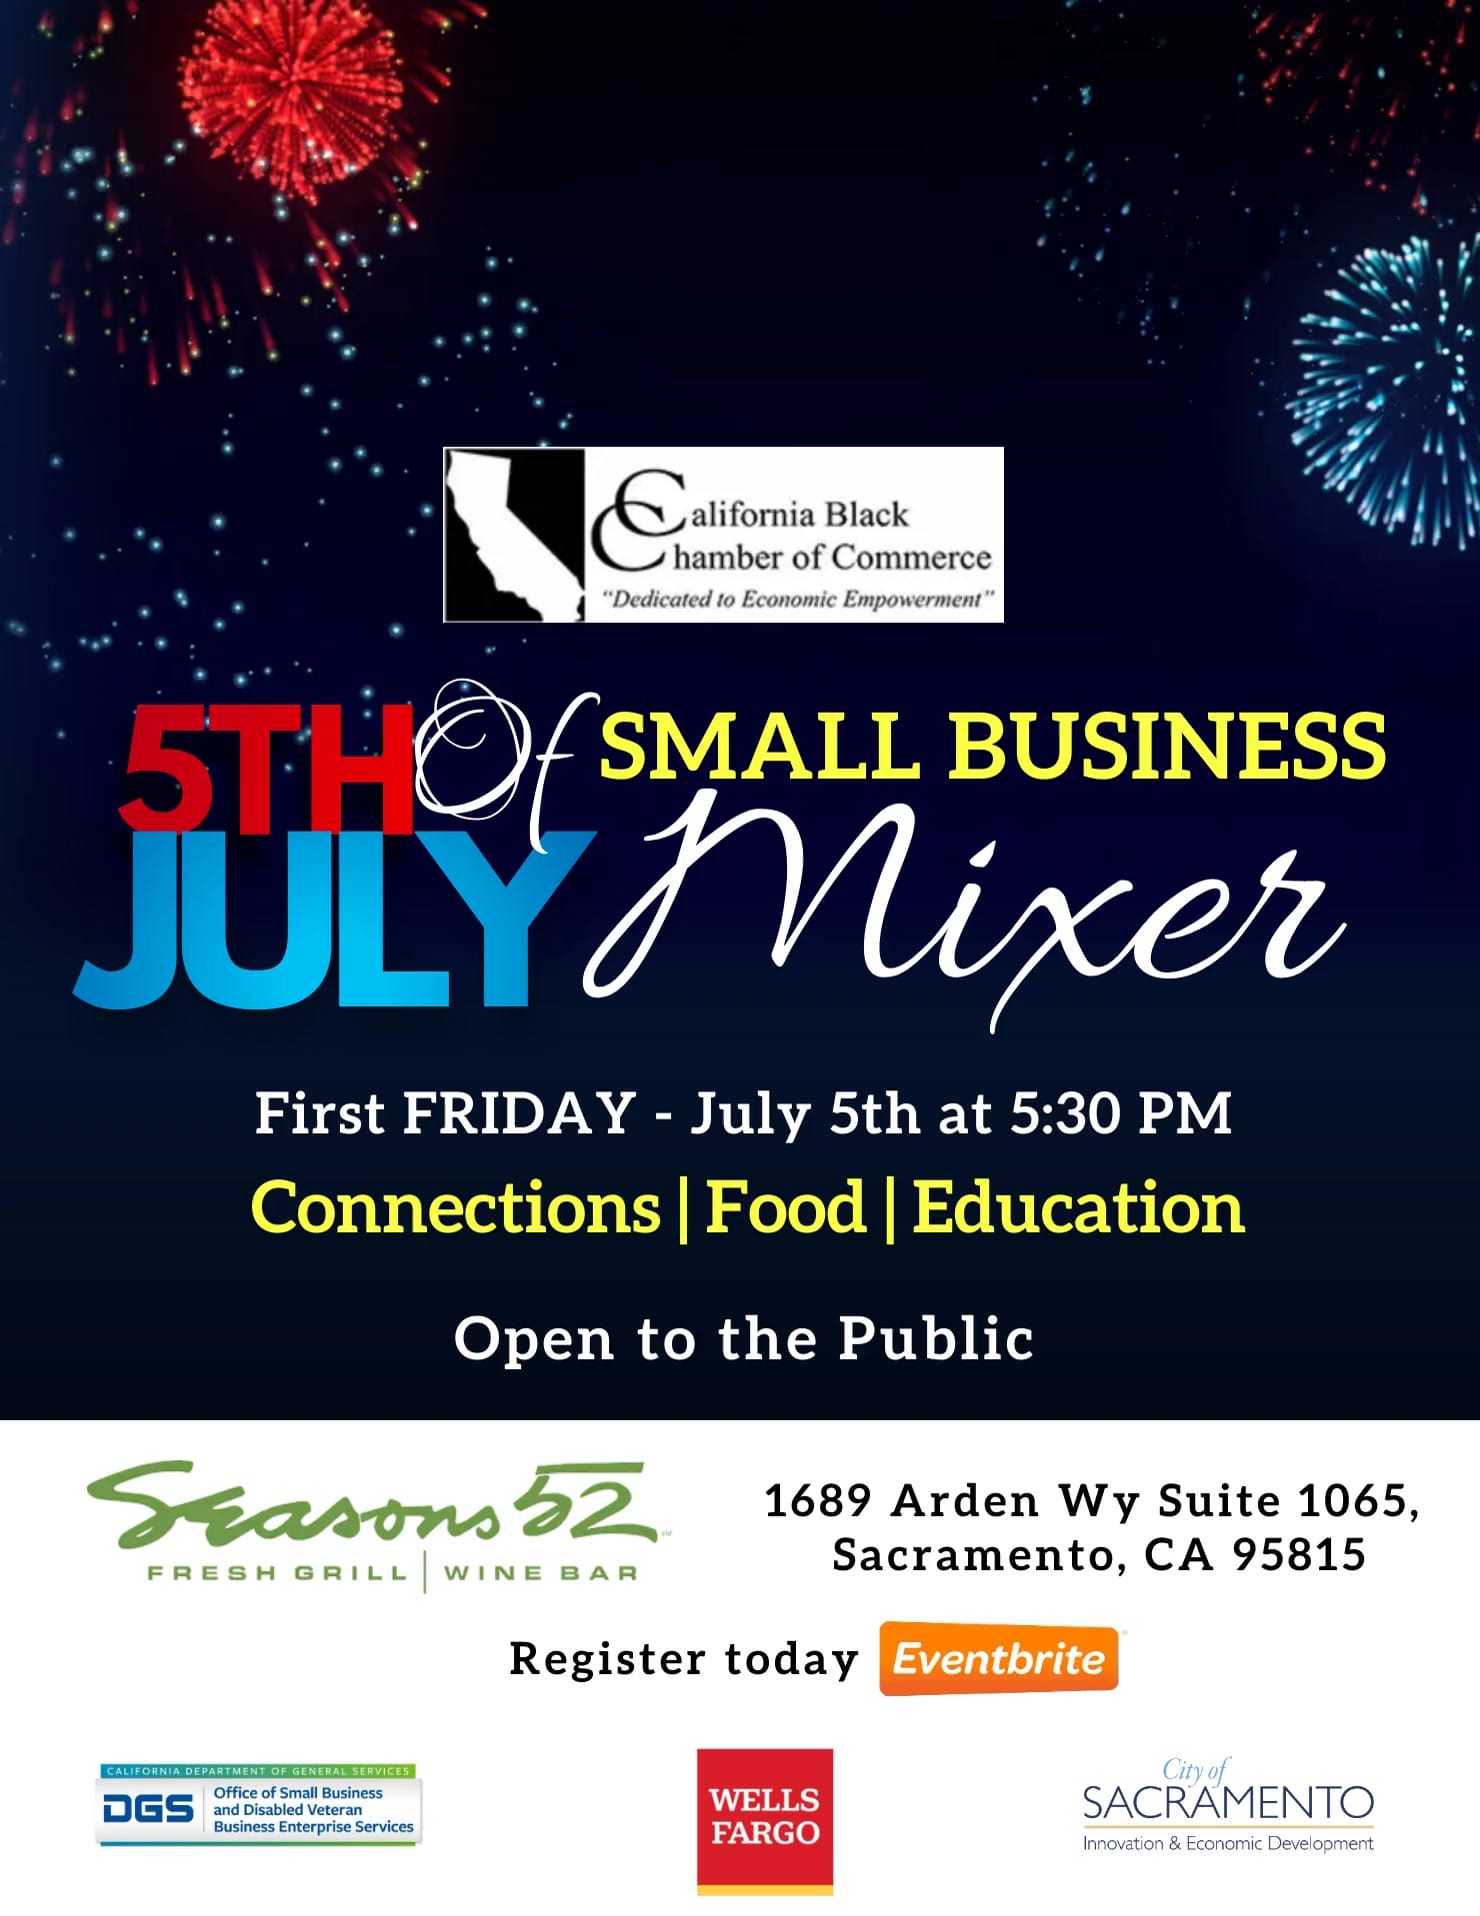 CALBCC 5th of July 5th Business Mixer Flier